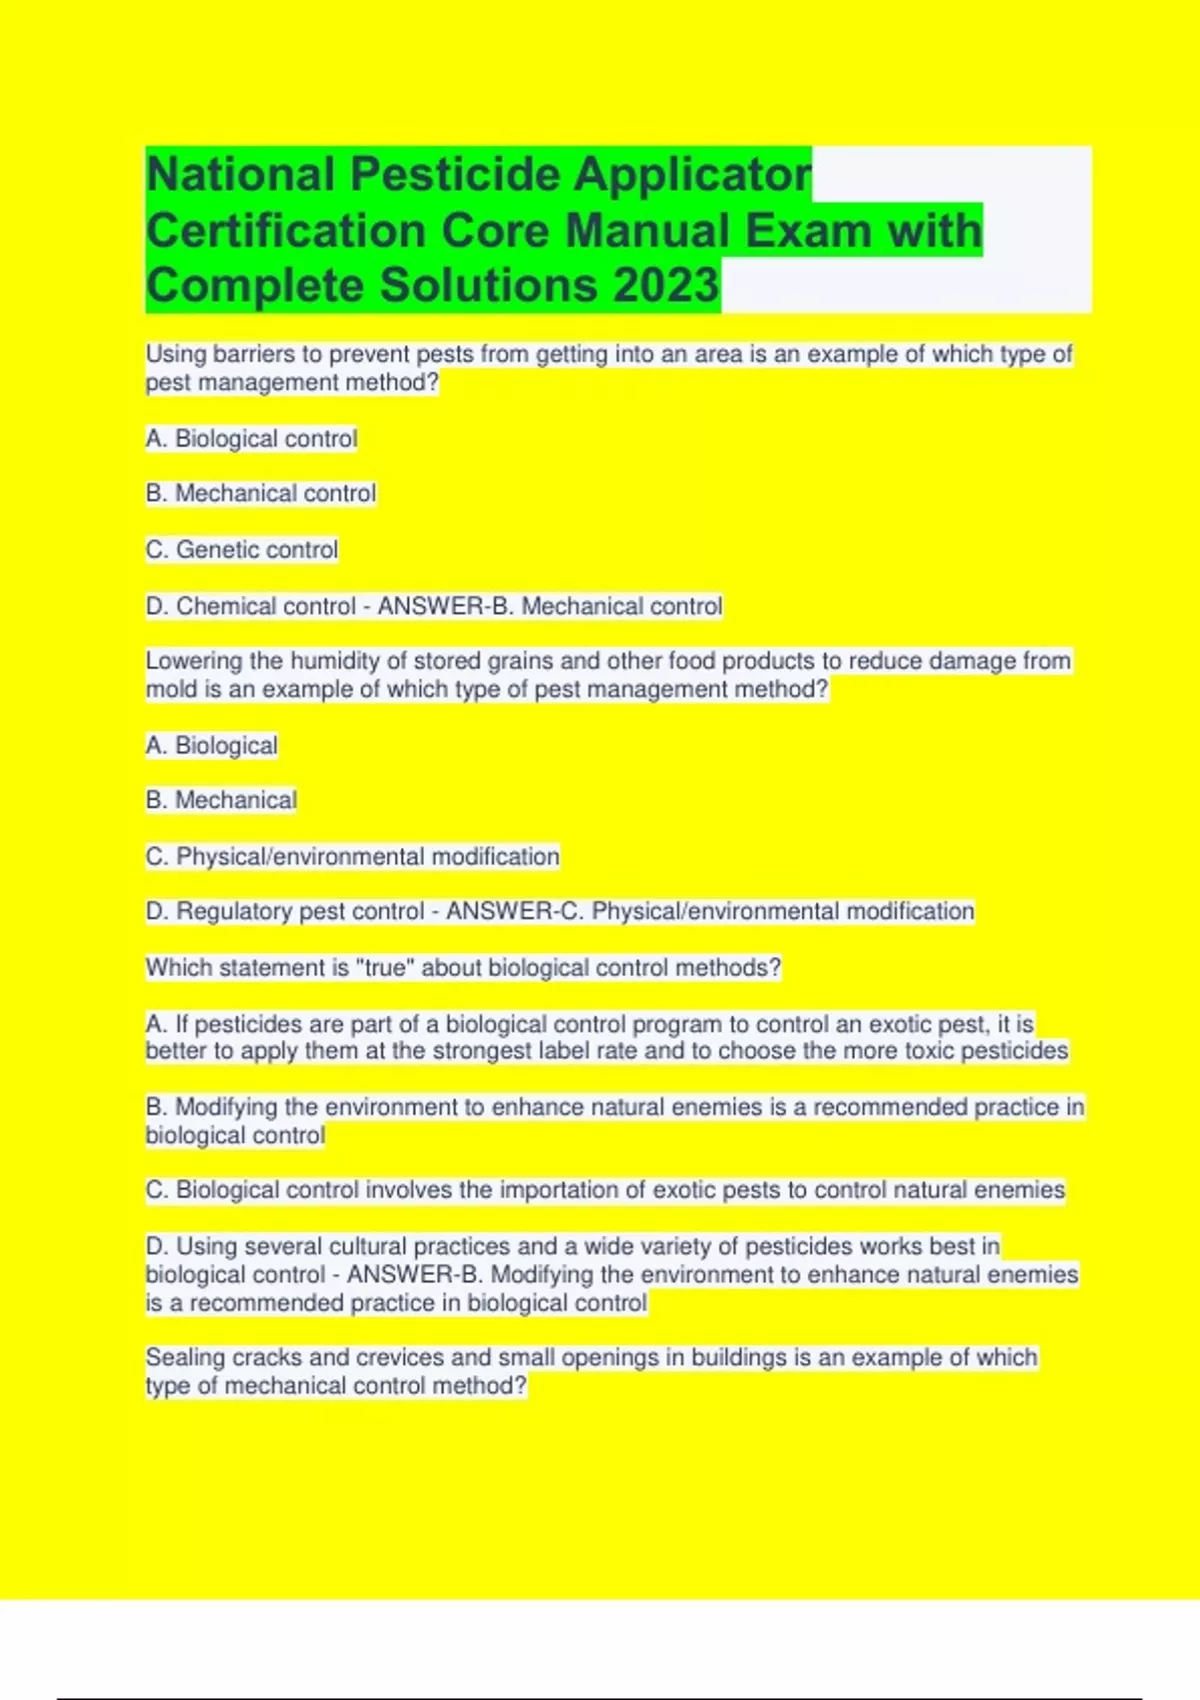 National Pesticide Applicator Certification Core Manual Exam with